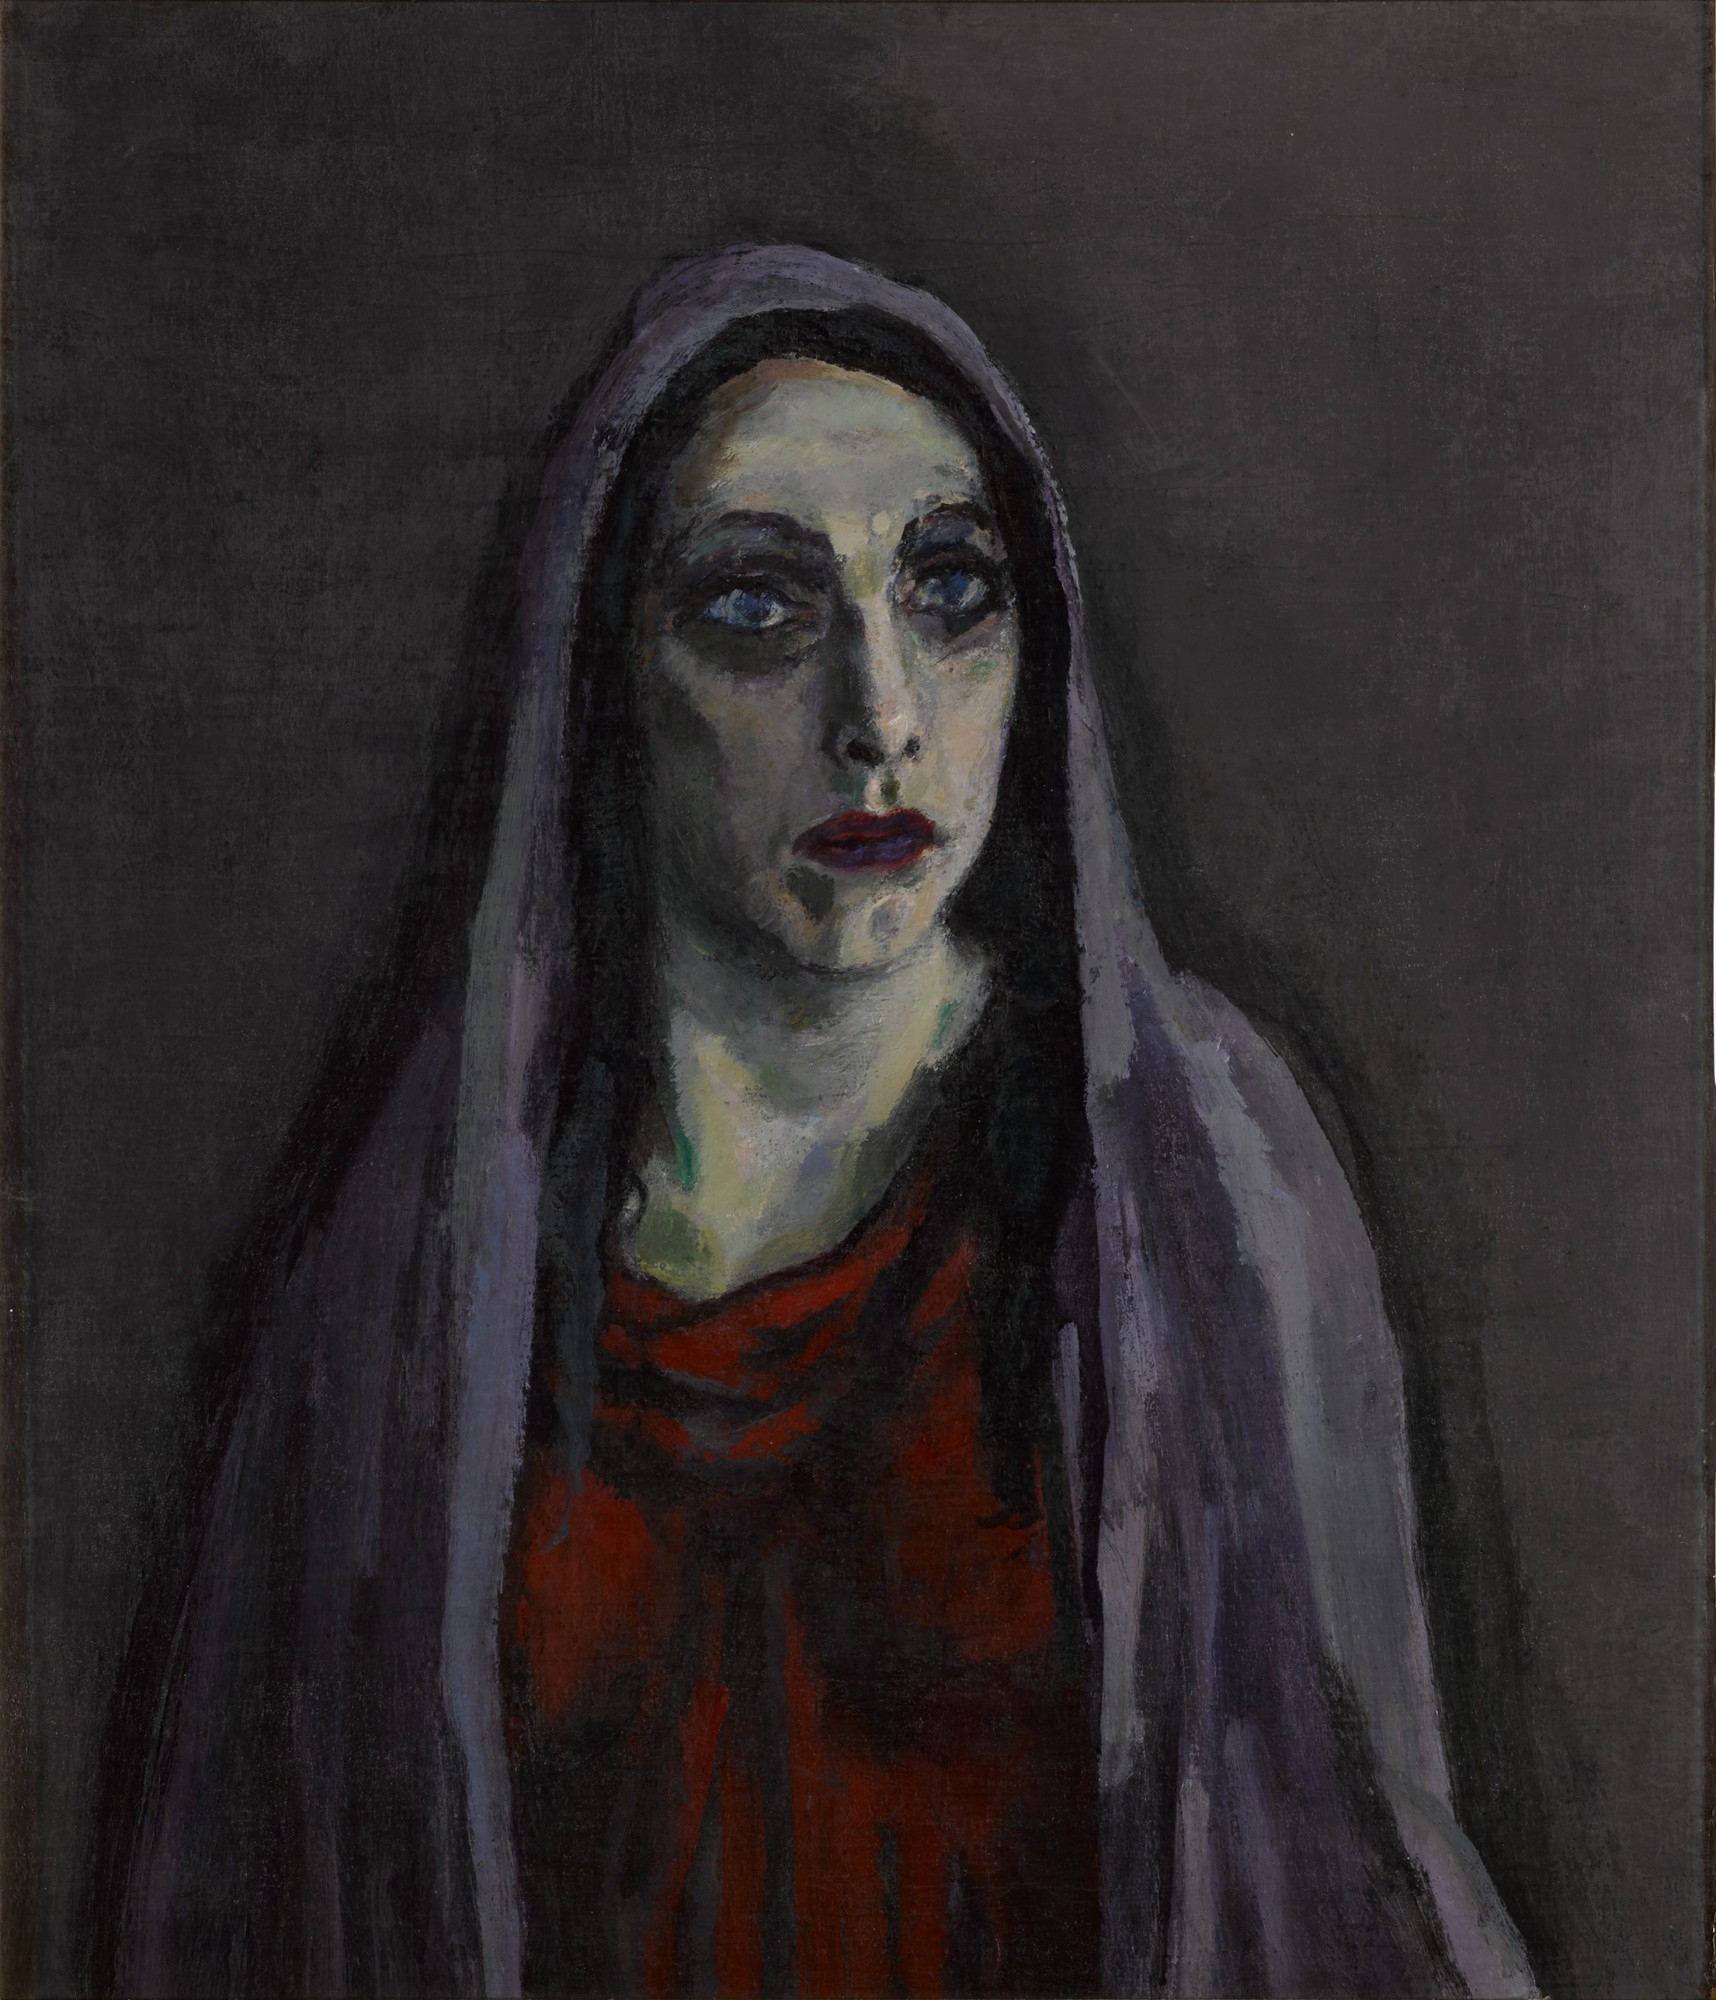 Portret van Charlotte Theresia Catharina Köhler (1892-1977) by Jan Sluijters, Executed in 1941